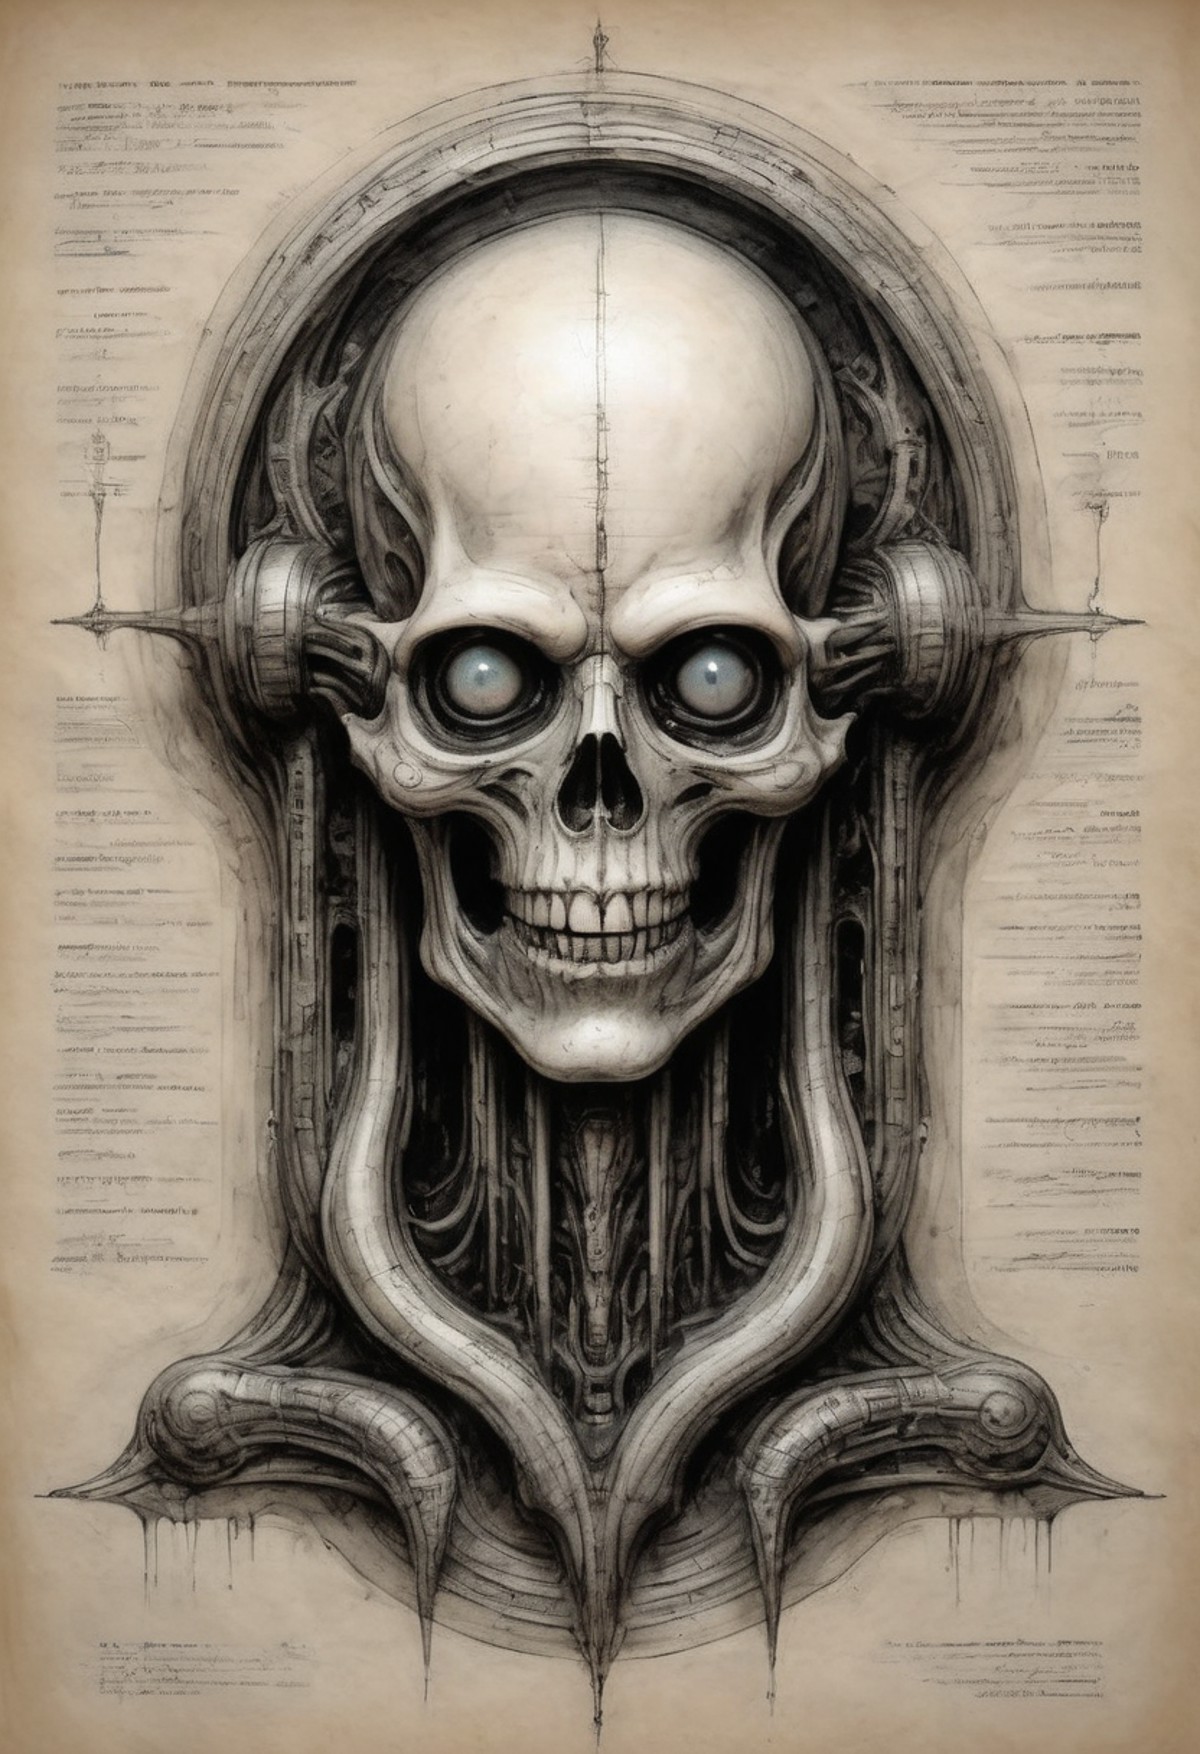 ink art on parchment by H.R. Giger writhing biomechanical glossy console glowing panels reflective chrome and inscrutable ...